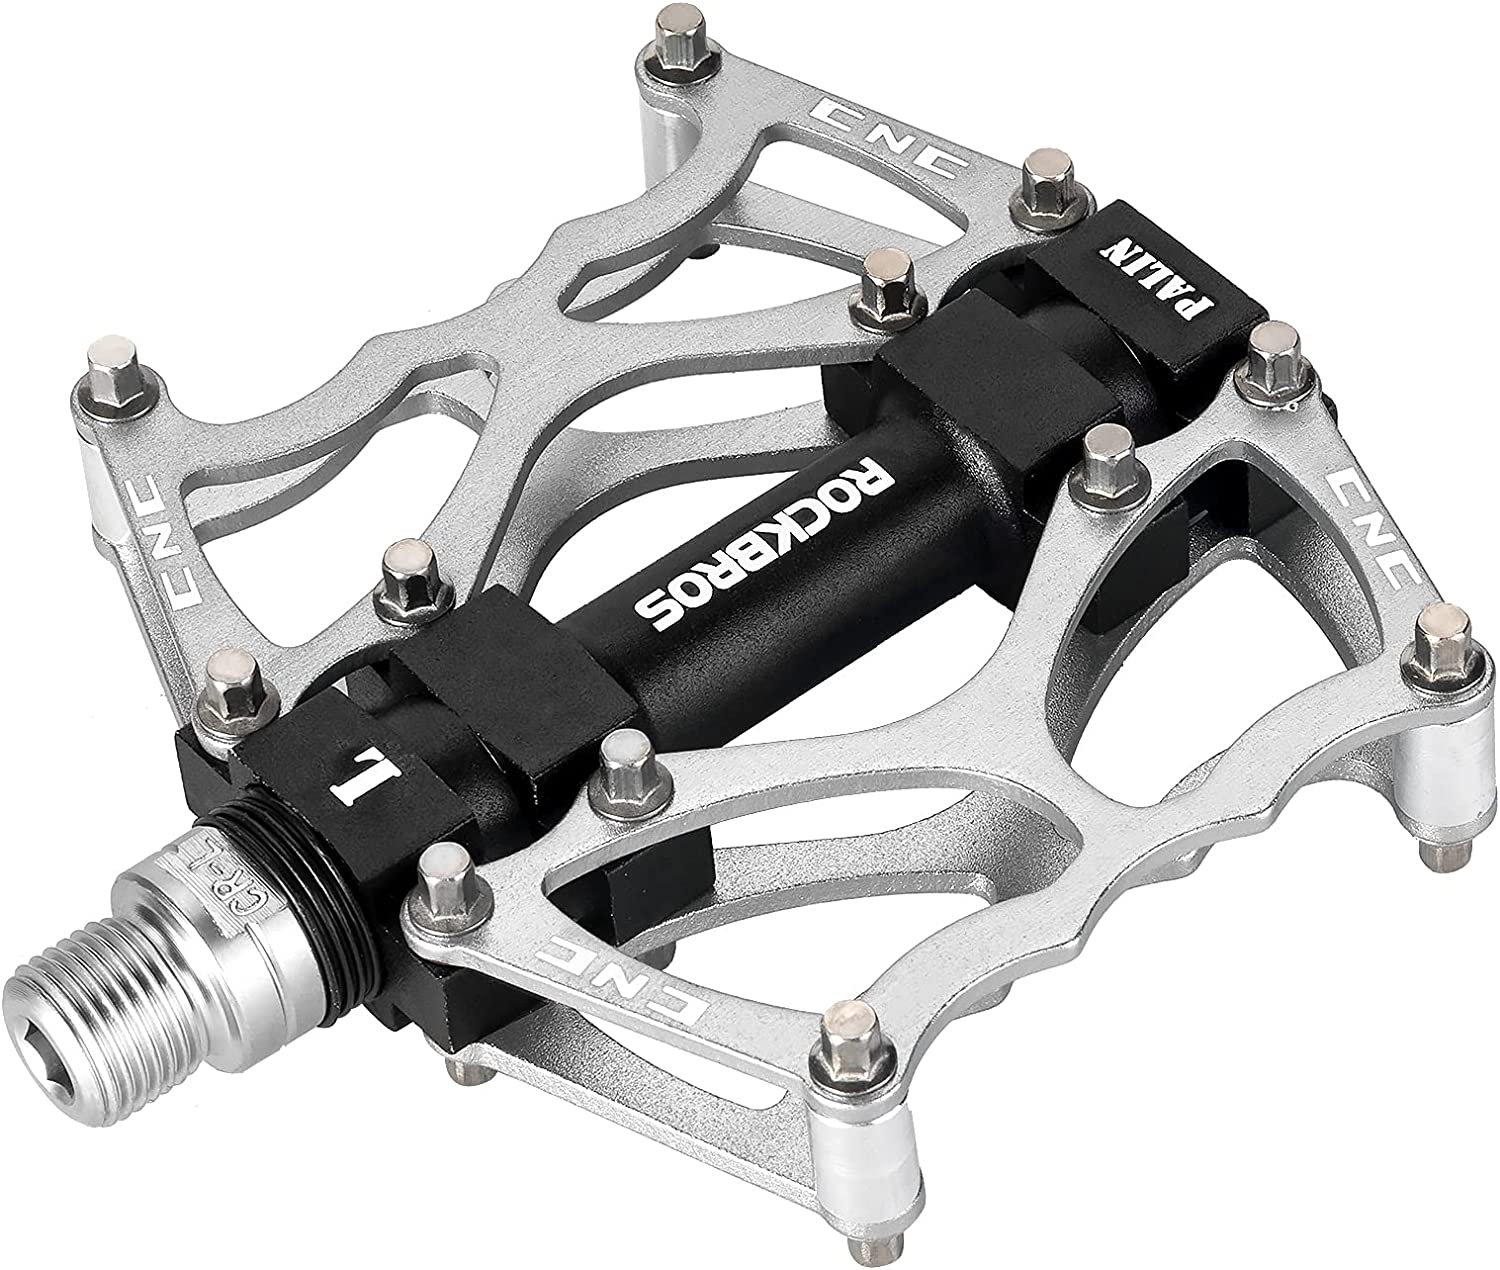 ROCKBROS Durable Lightweight Aluminum Alloy Bicycle Pedals